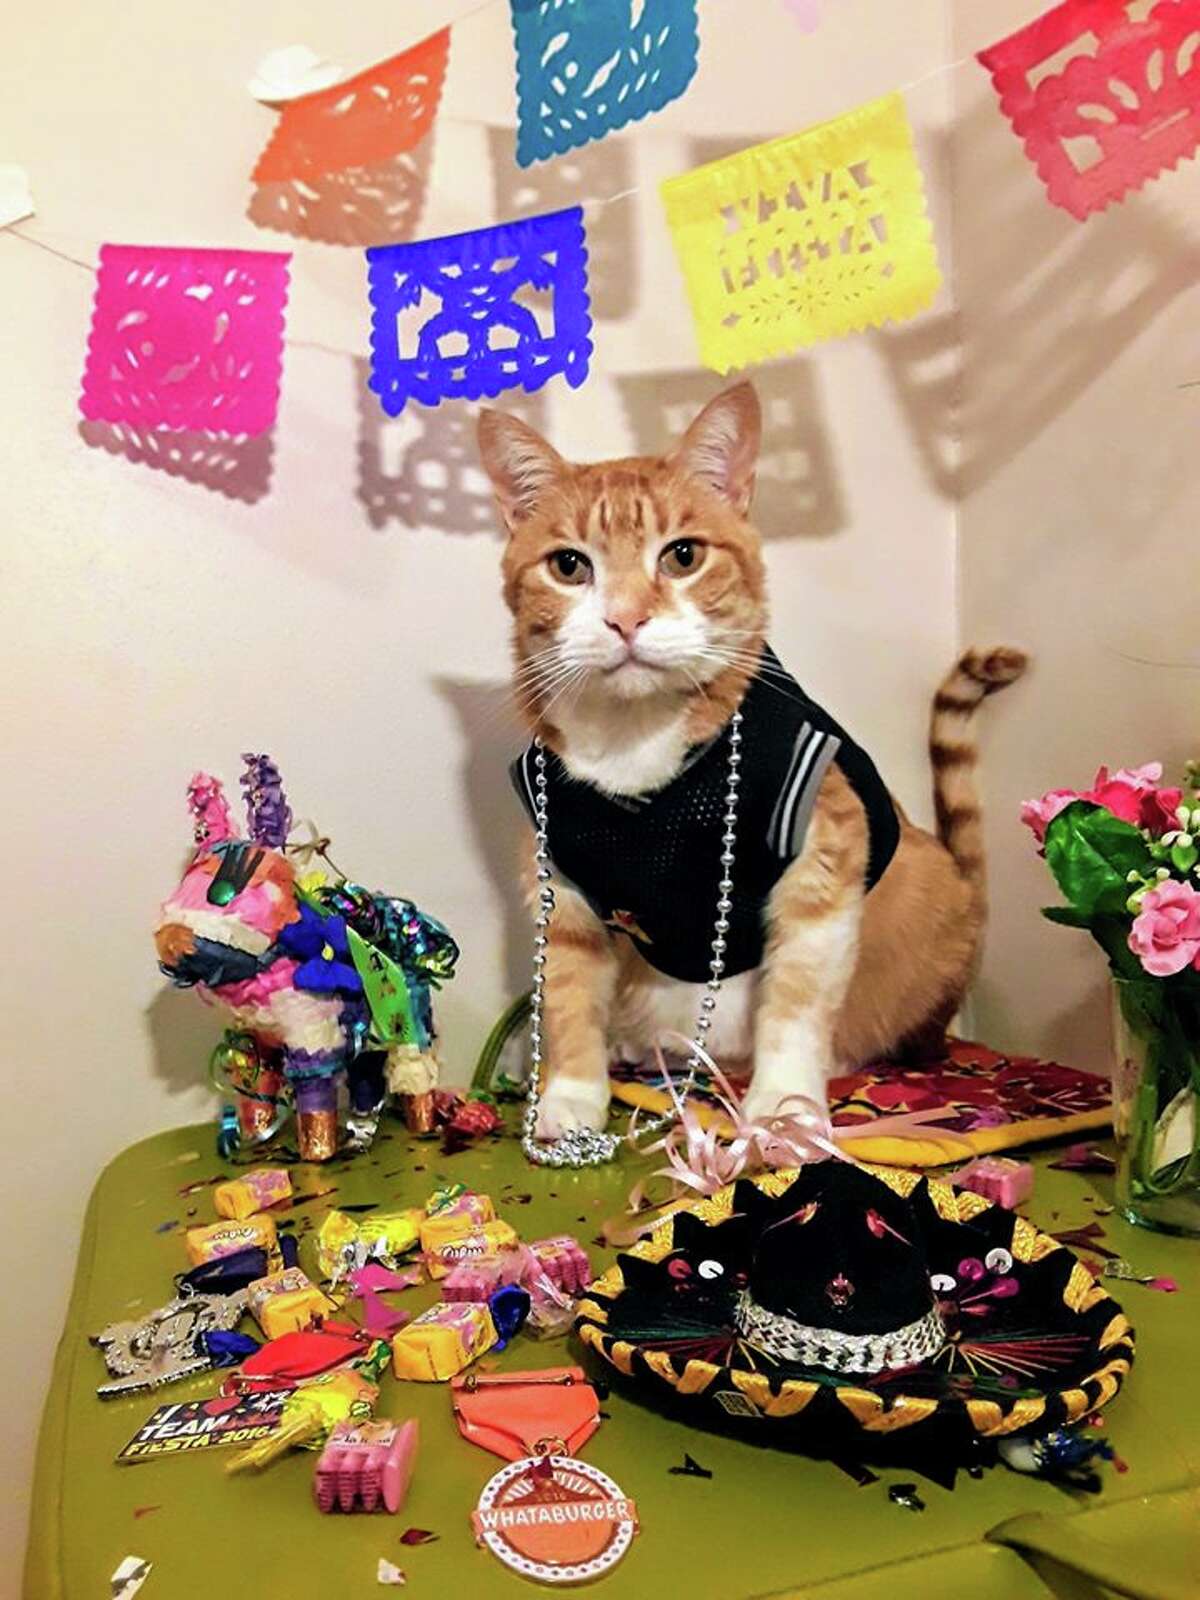 The San Antonio Humane Society will broadcast a Fiesta-style parade with shelter animals via Facebook Live at approximately 3 p.m. on May 2. Each year, the humane society hosts the "El Rey Fido" coronation, an official Fiesta fundraising event, which joins other pet-centered celebrations on the usual April itinerary. Although all parties and parades are being held off due to the ongoing pandemic, Daniela Vasquez, the society's animal behavior evaluator and trainer, found a way to keep the fun going.